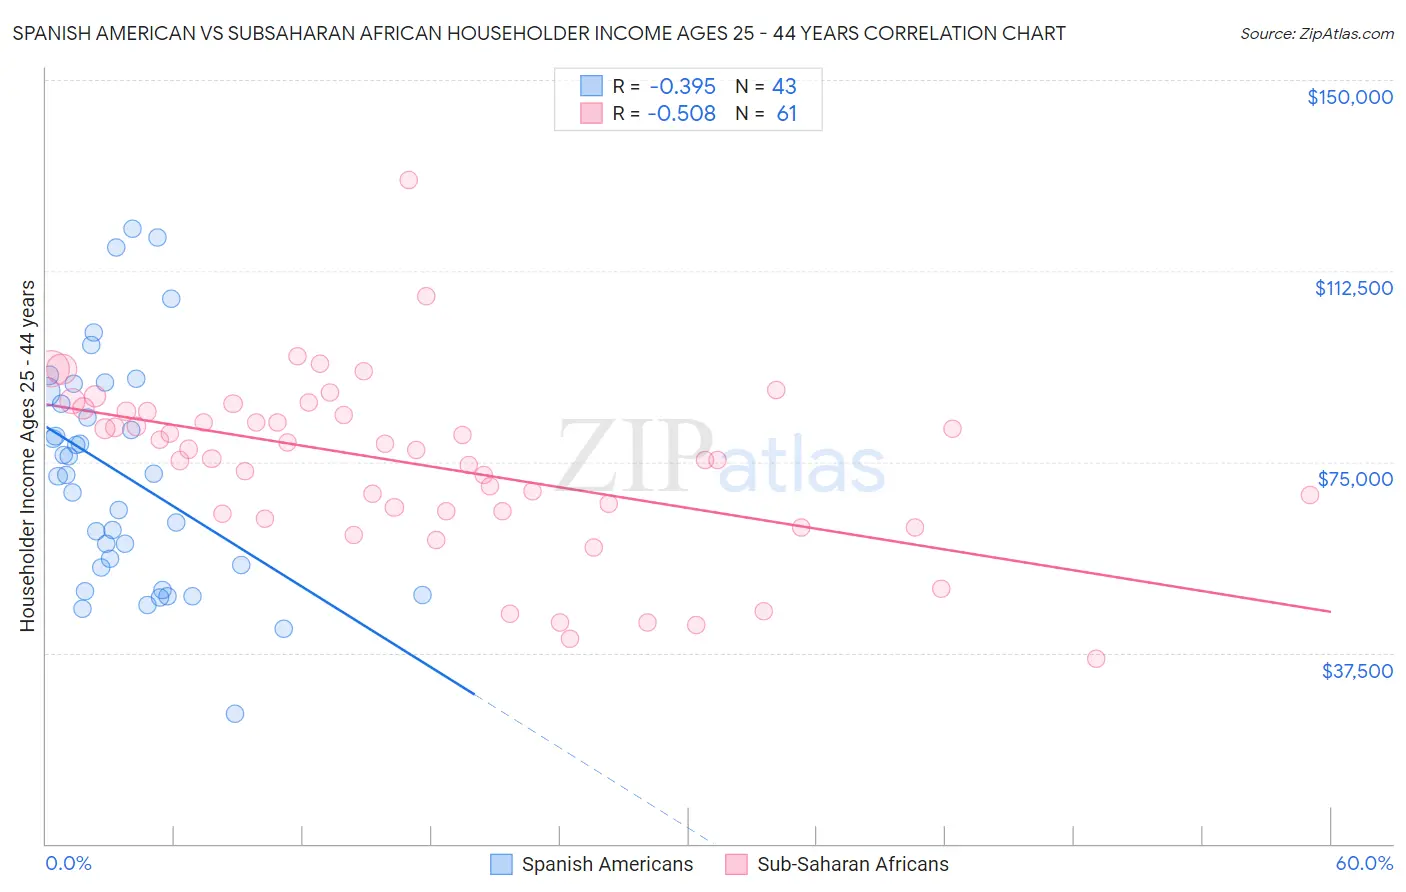 Spanish American vs Subsaharan African Householder Income Ages 25 - 44 years